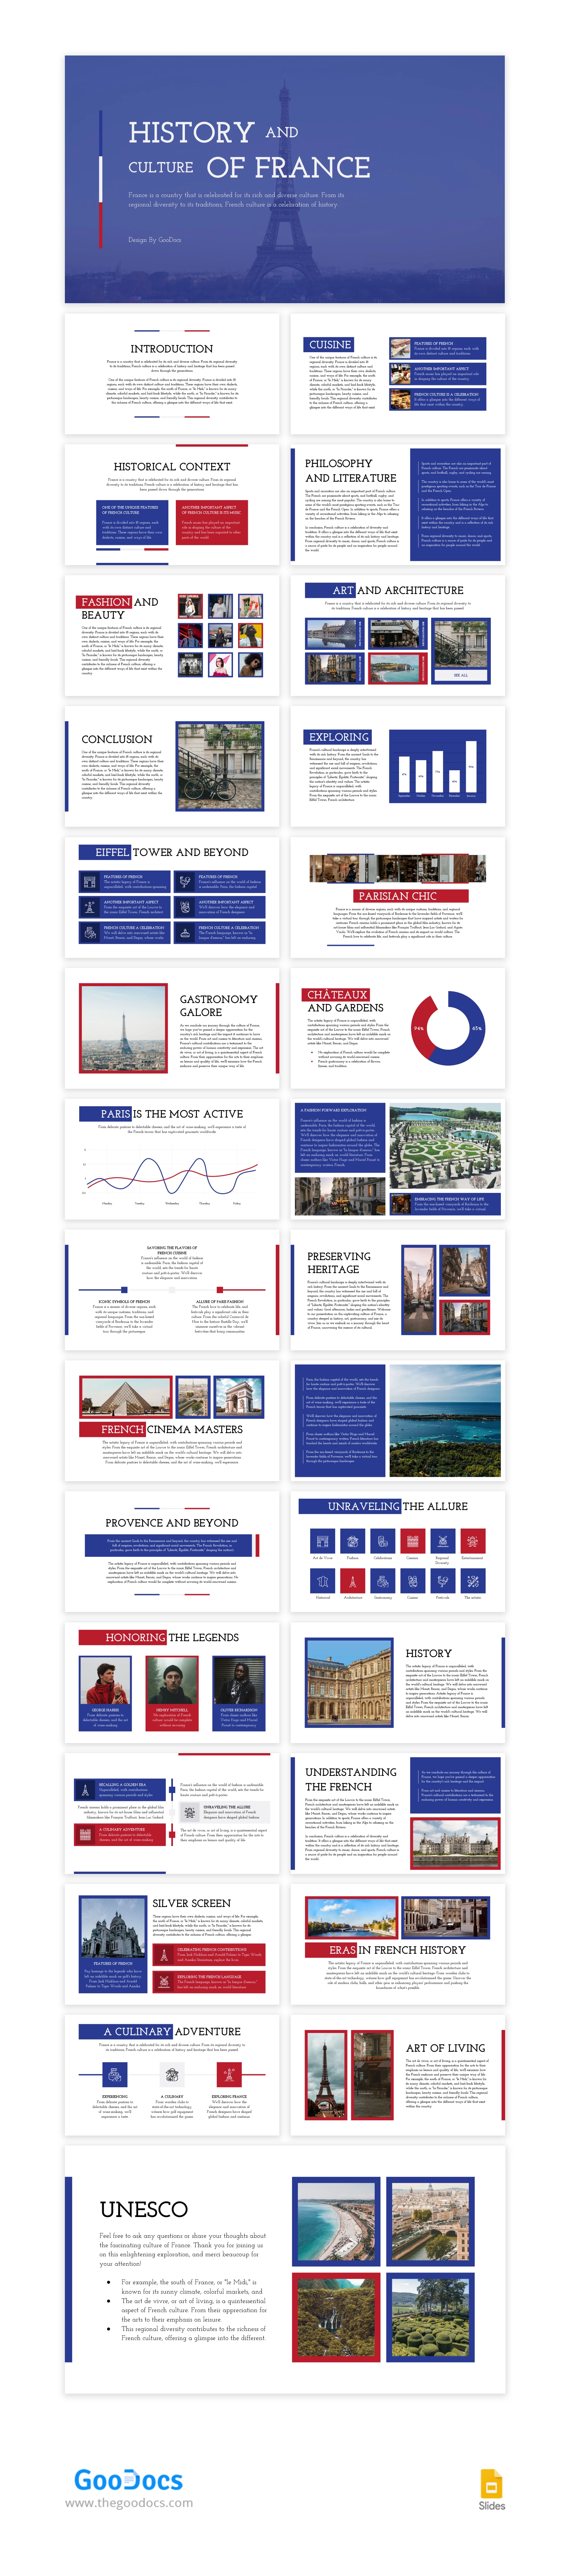 History and Culture of France - free Google Docs Template - 10067058